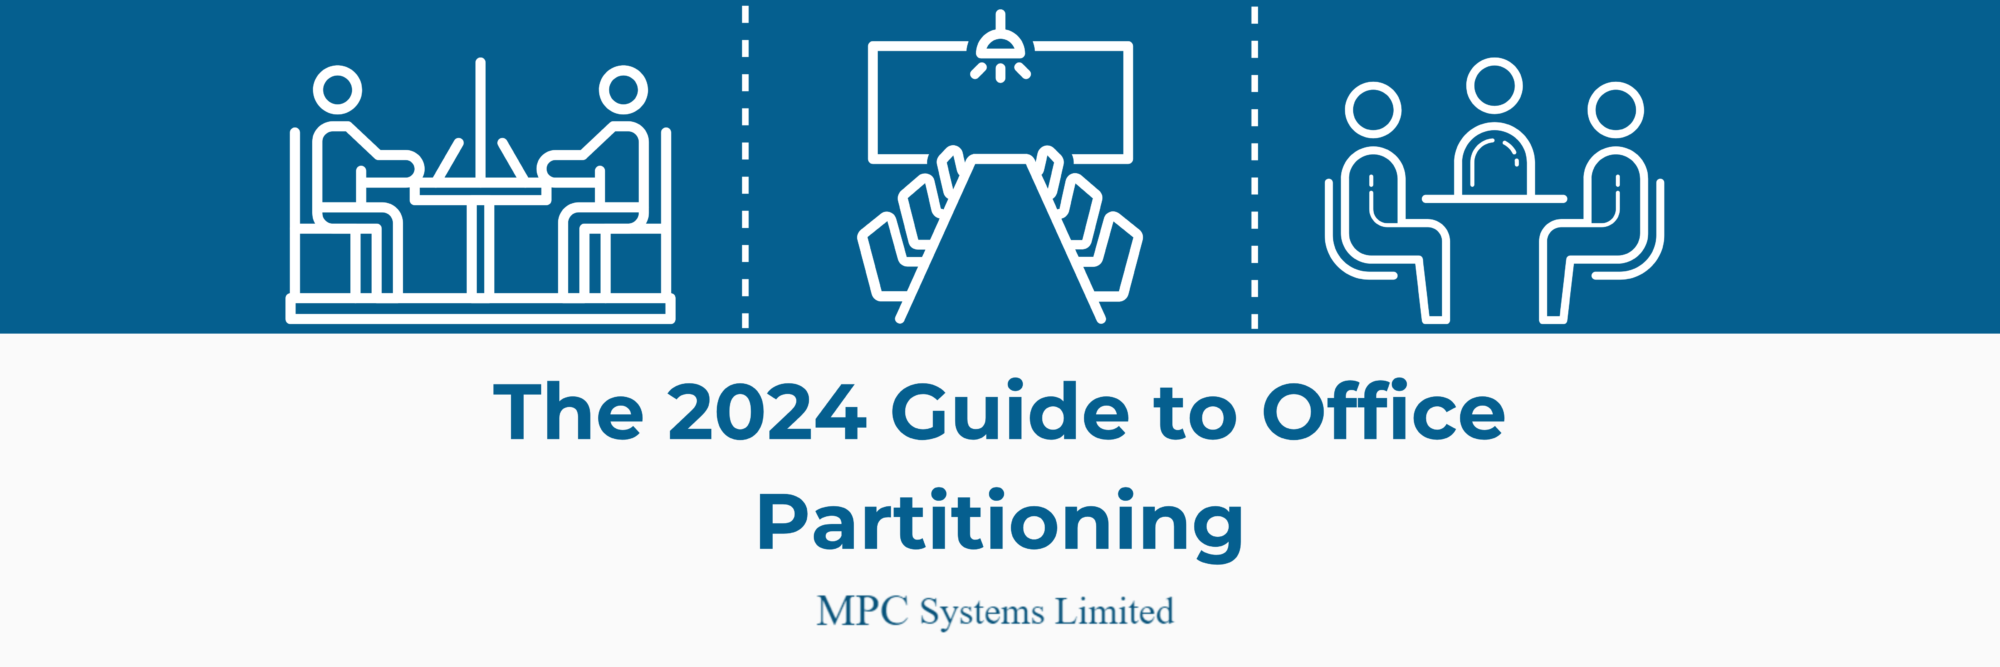 The 2024 Guide to Office Partitioning